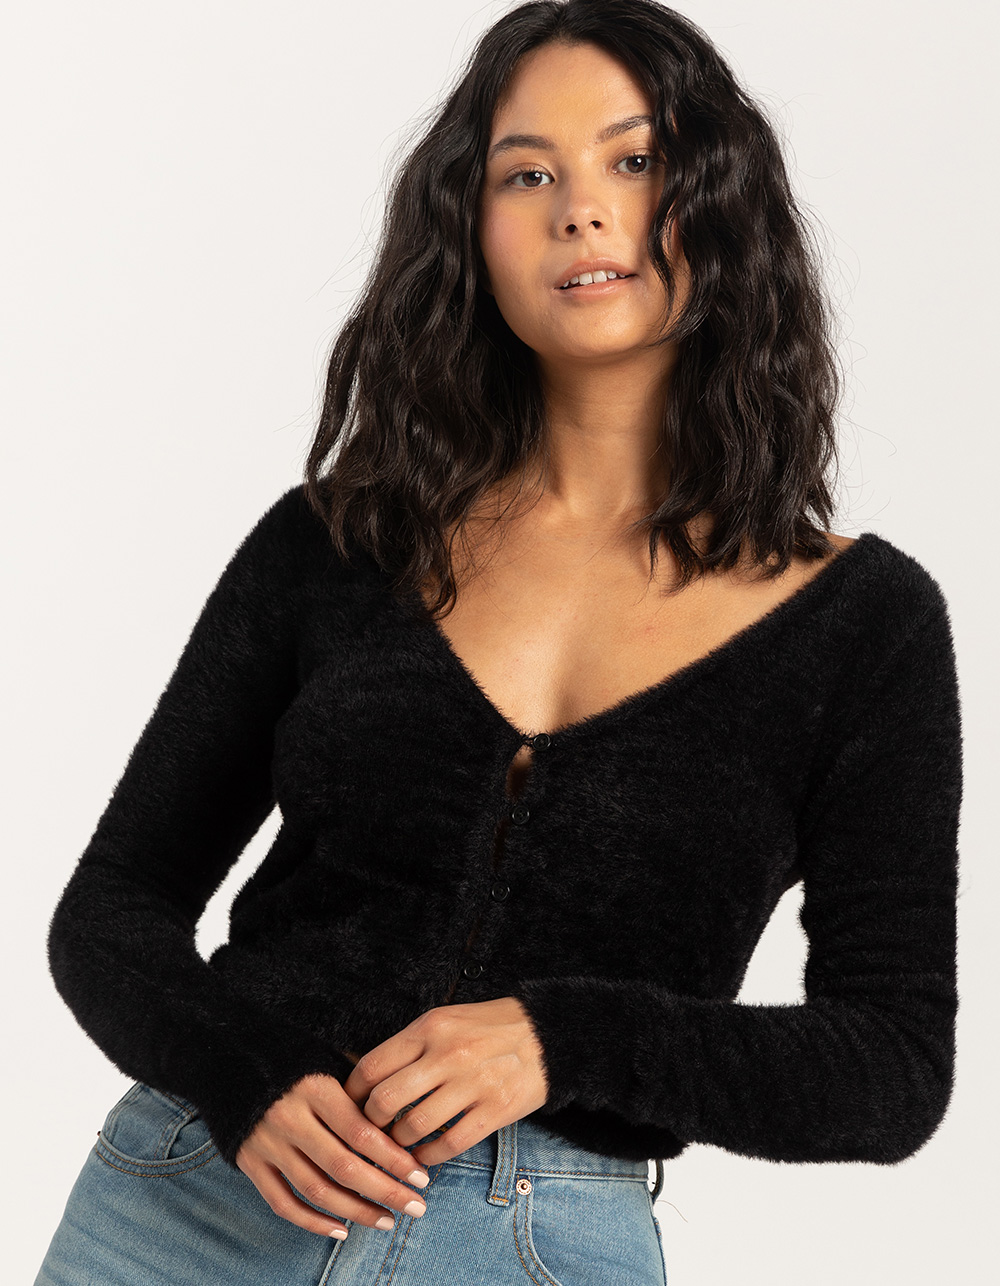 HURLEY Smooth Move Womens Cardigan Sweater